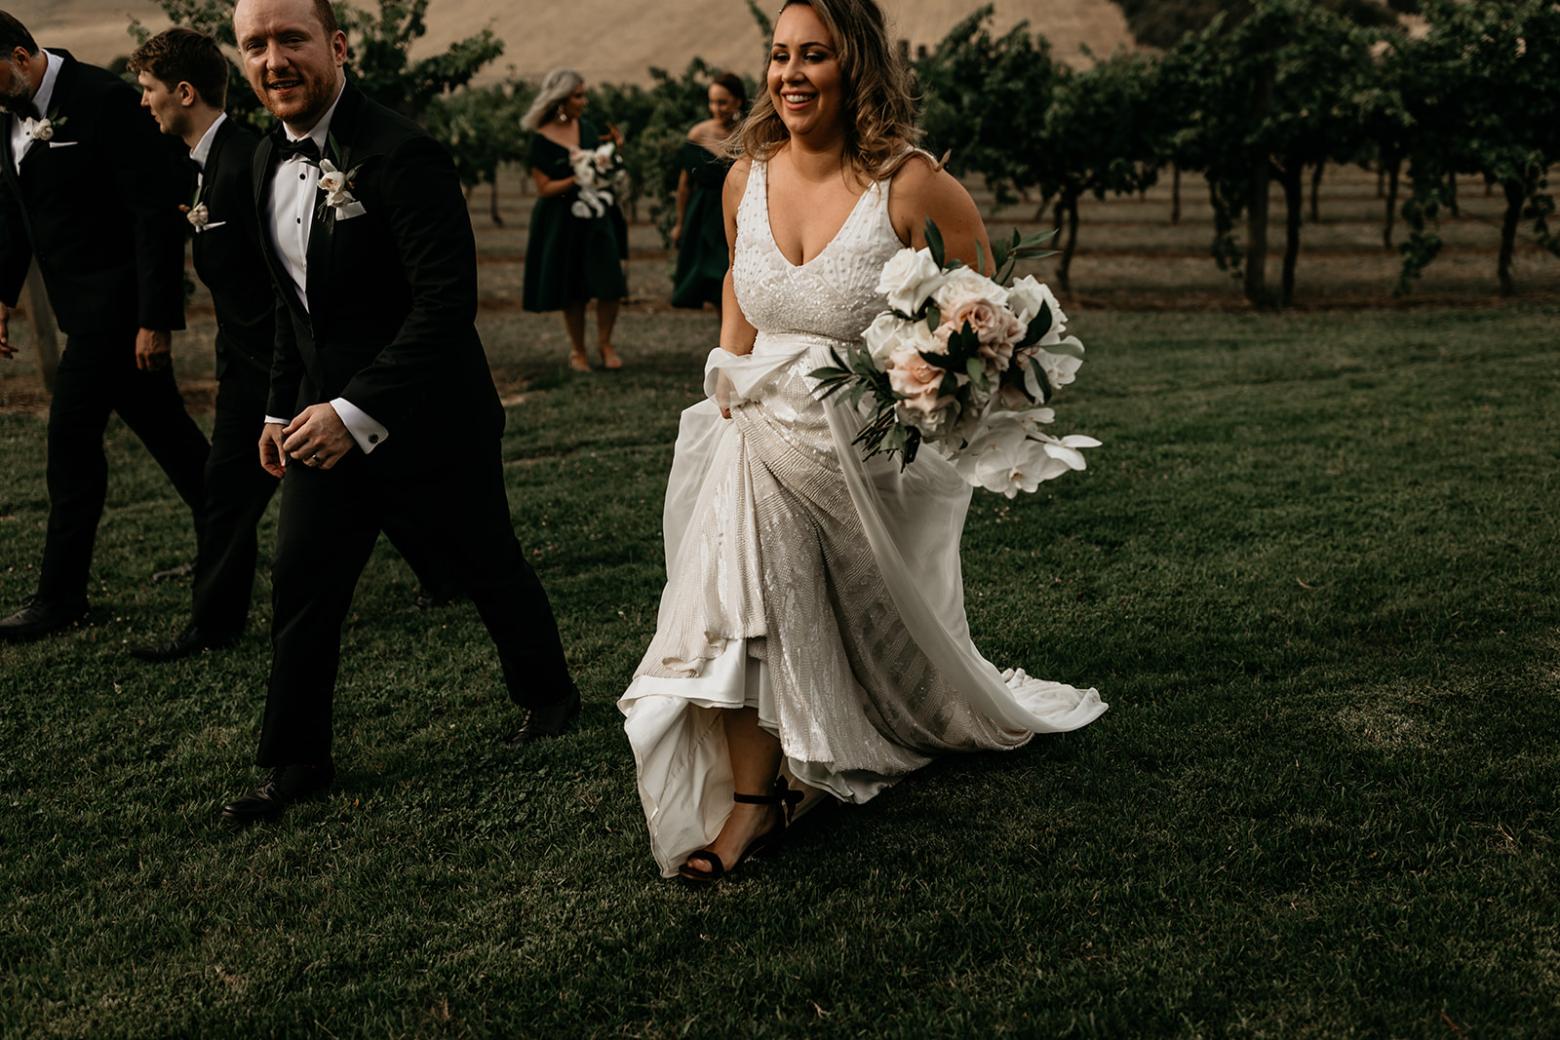 Real bride Liana wore the Luxe Fontanne wedding dress by Karen Willis Holmes.